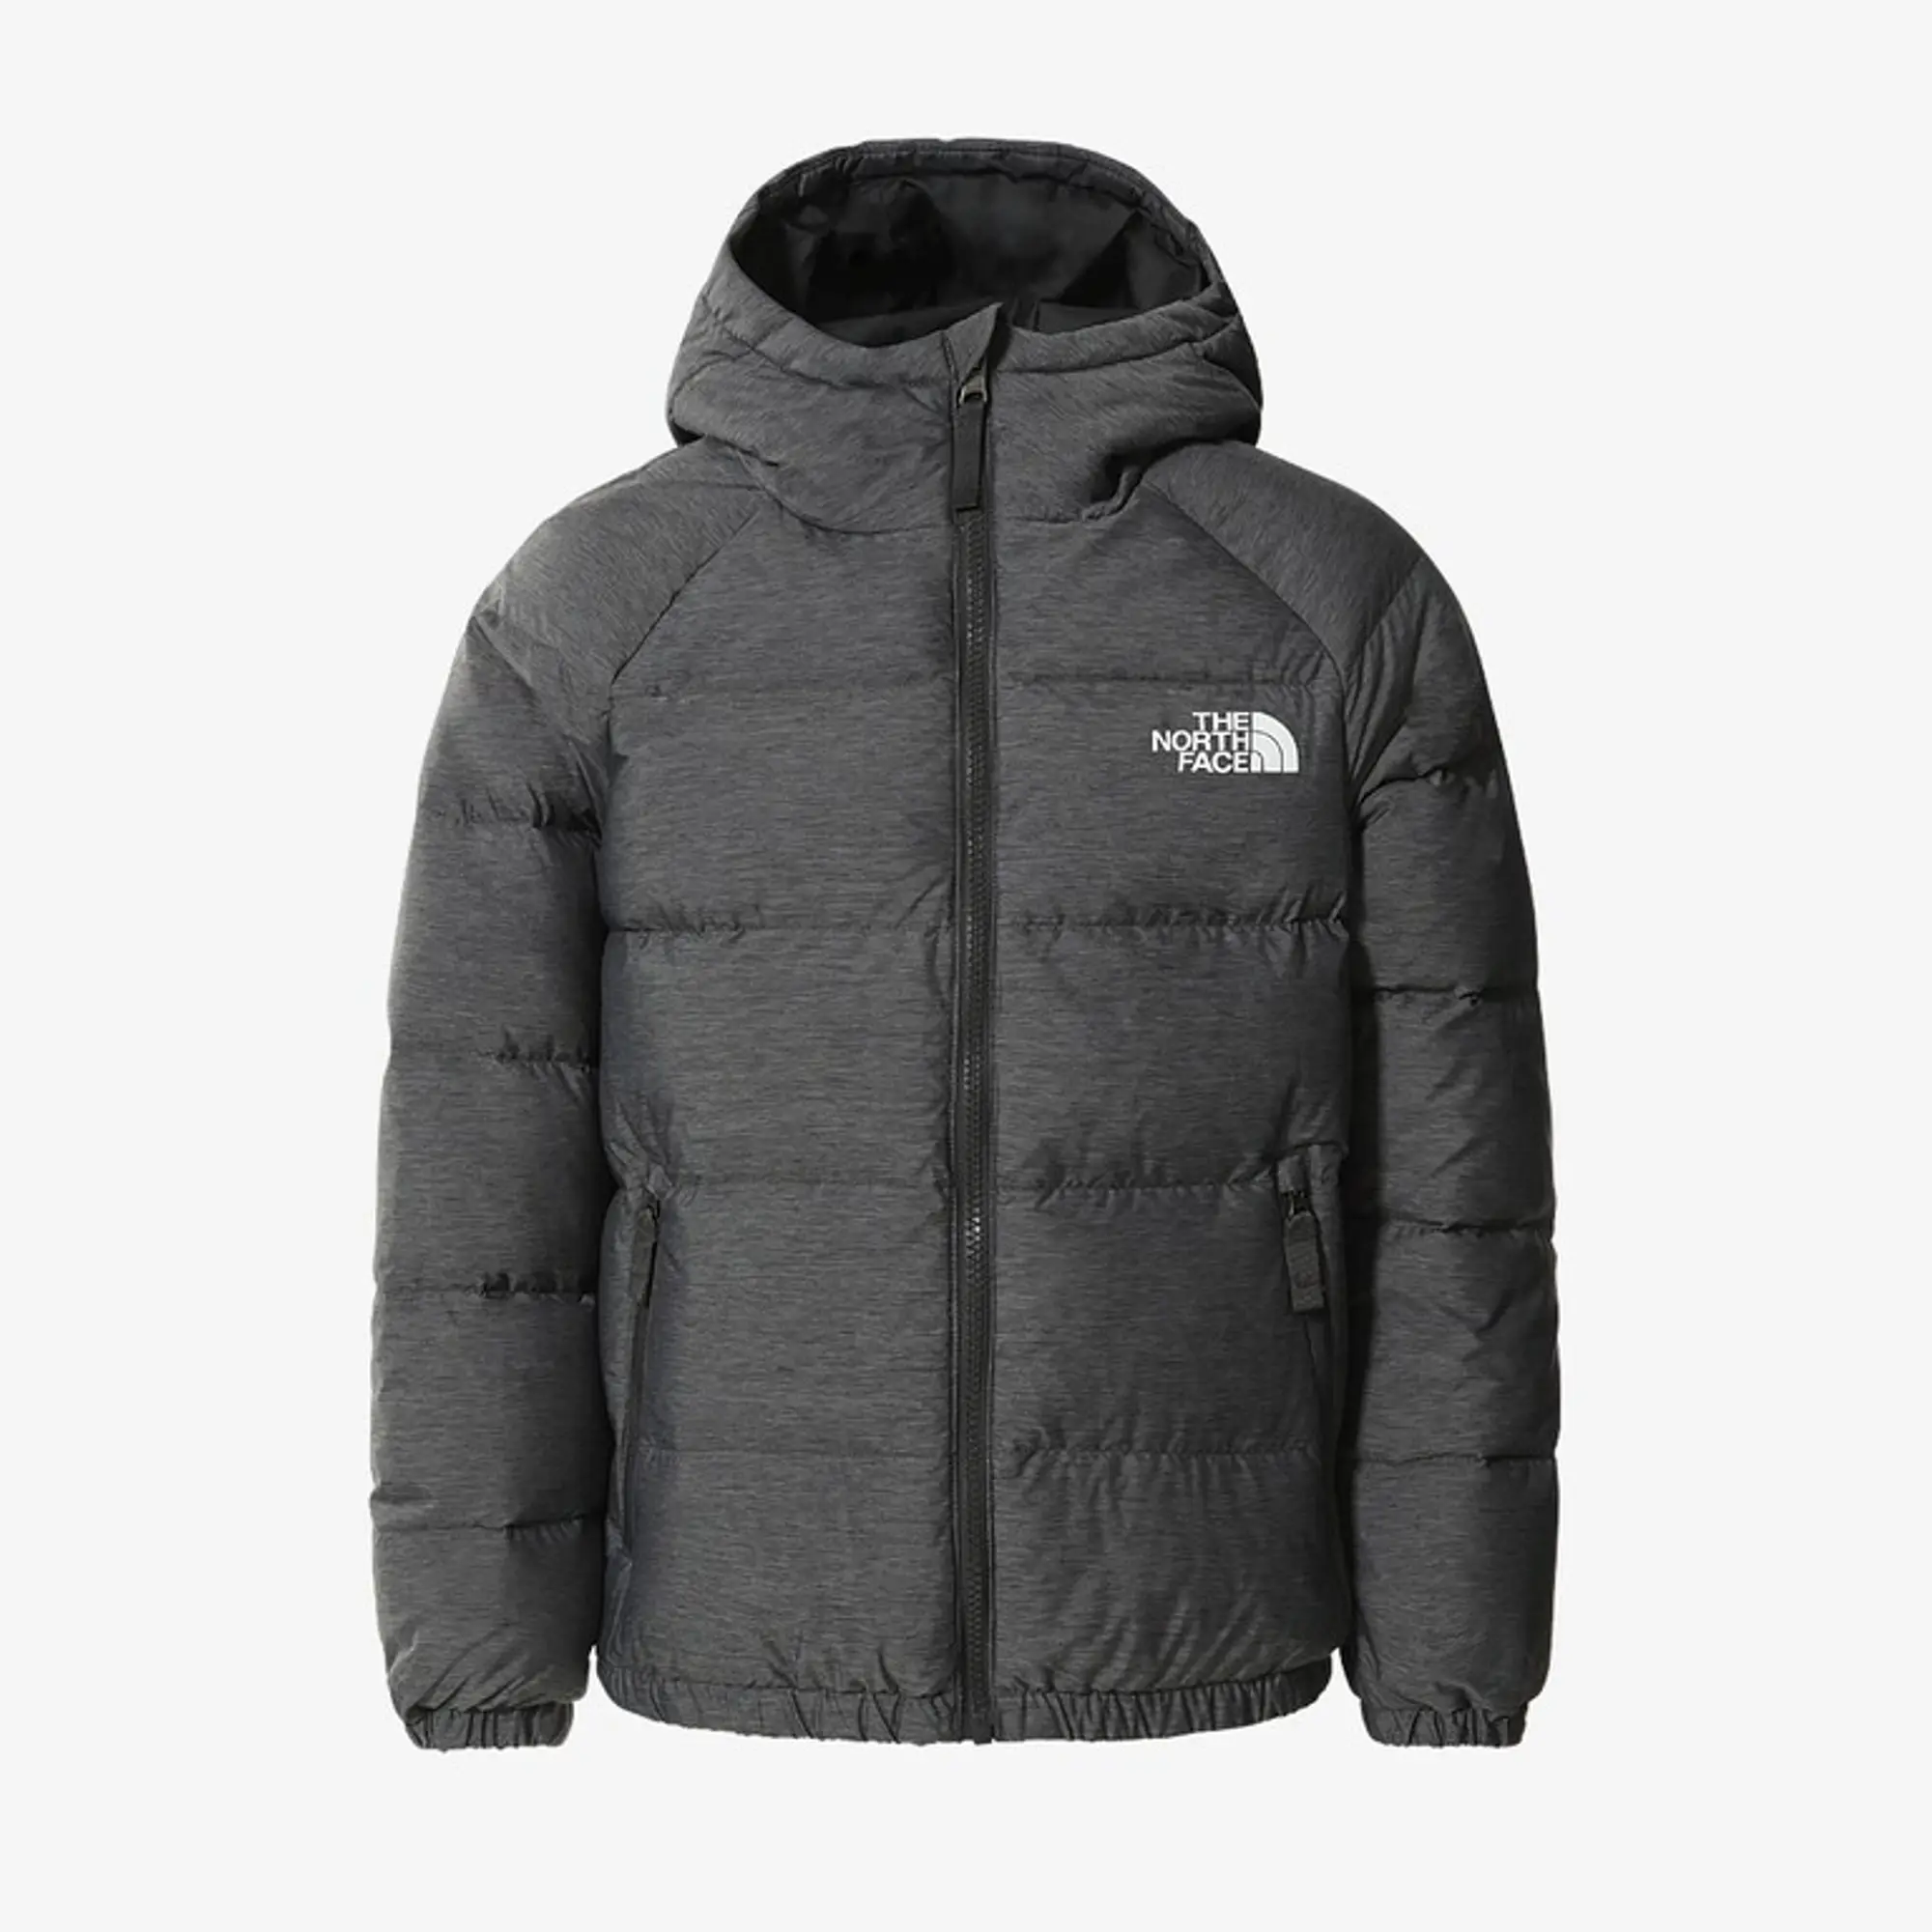 The North Face Hyalite Down Jacket 6 16 Yrs